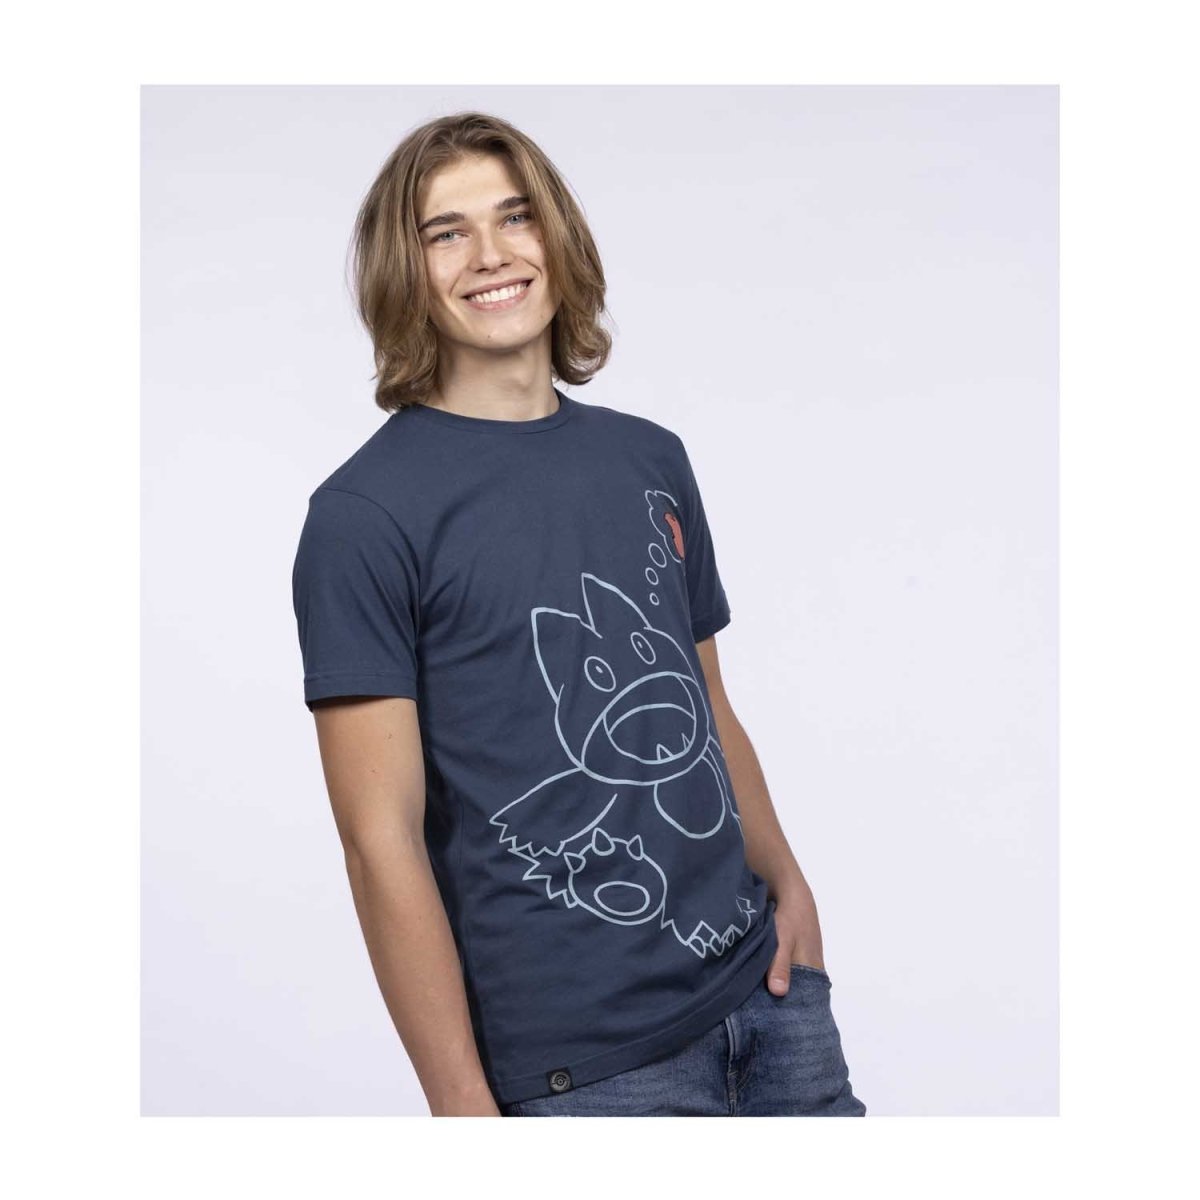 Munchlax Snack Time Fit Crew Neck T-Shirt - Adult | Center Official Site